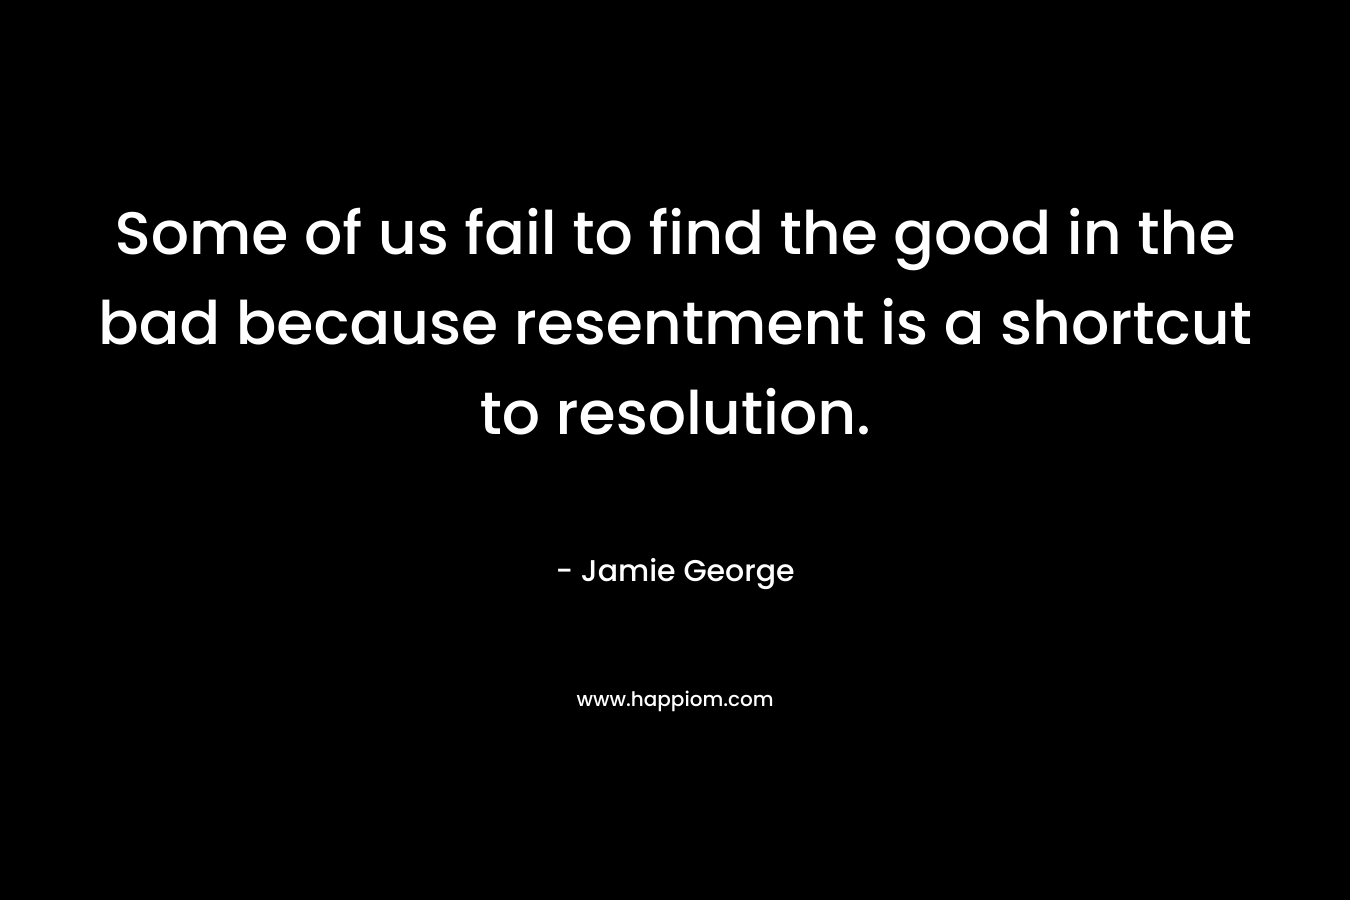 Some of us fail to find the good in the bad because resentment is a shortcut to resolution.